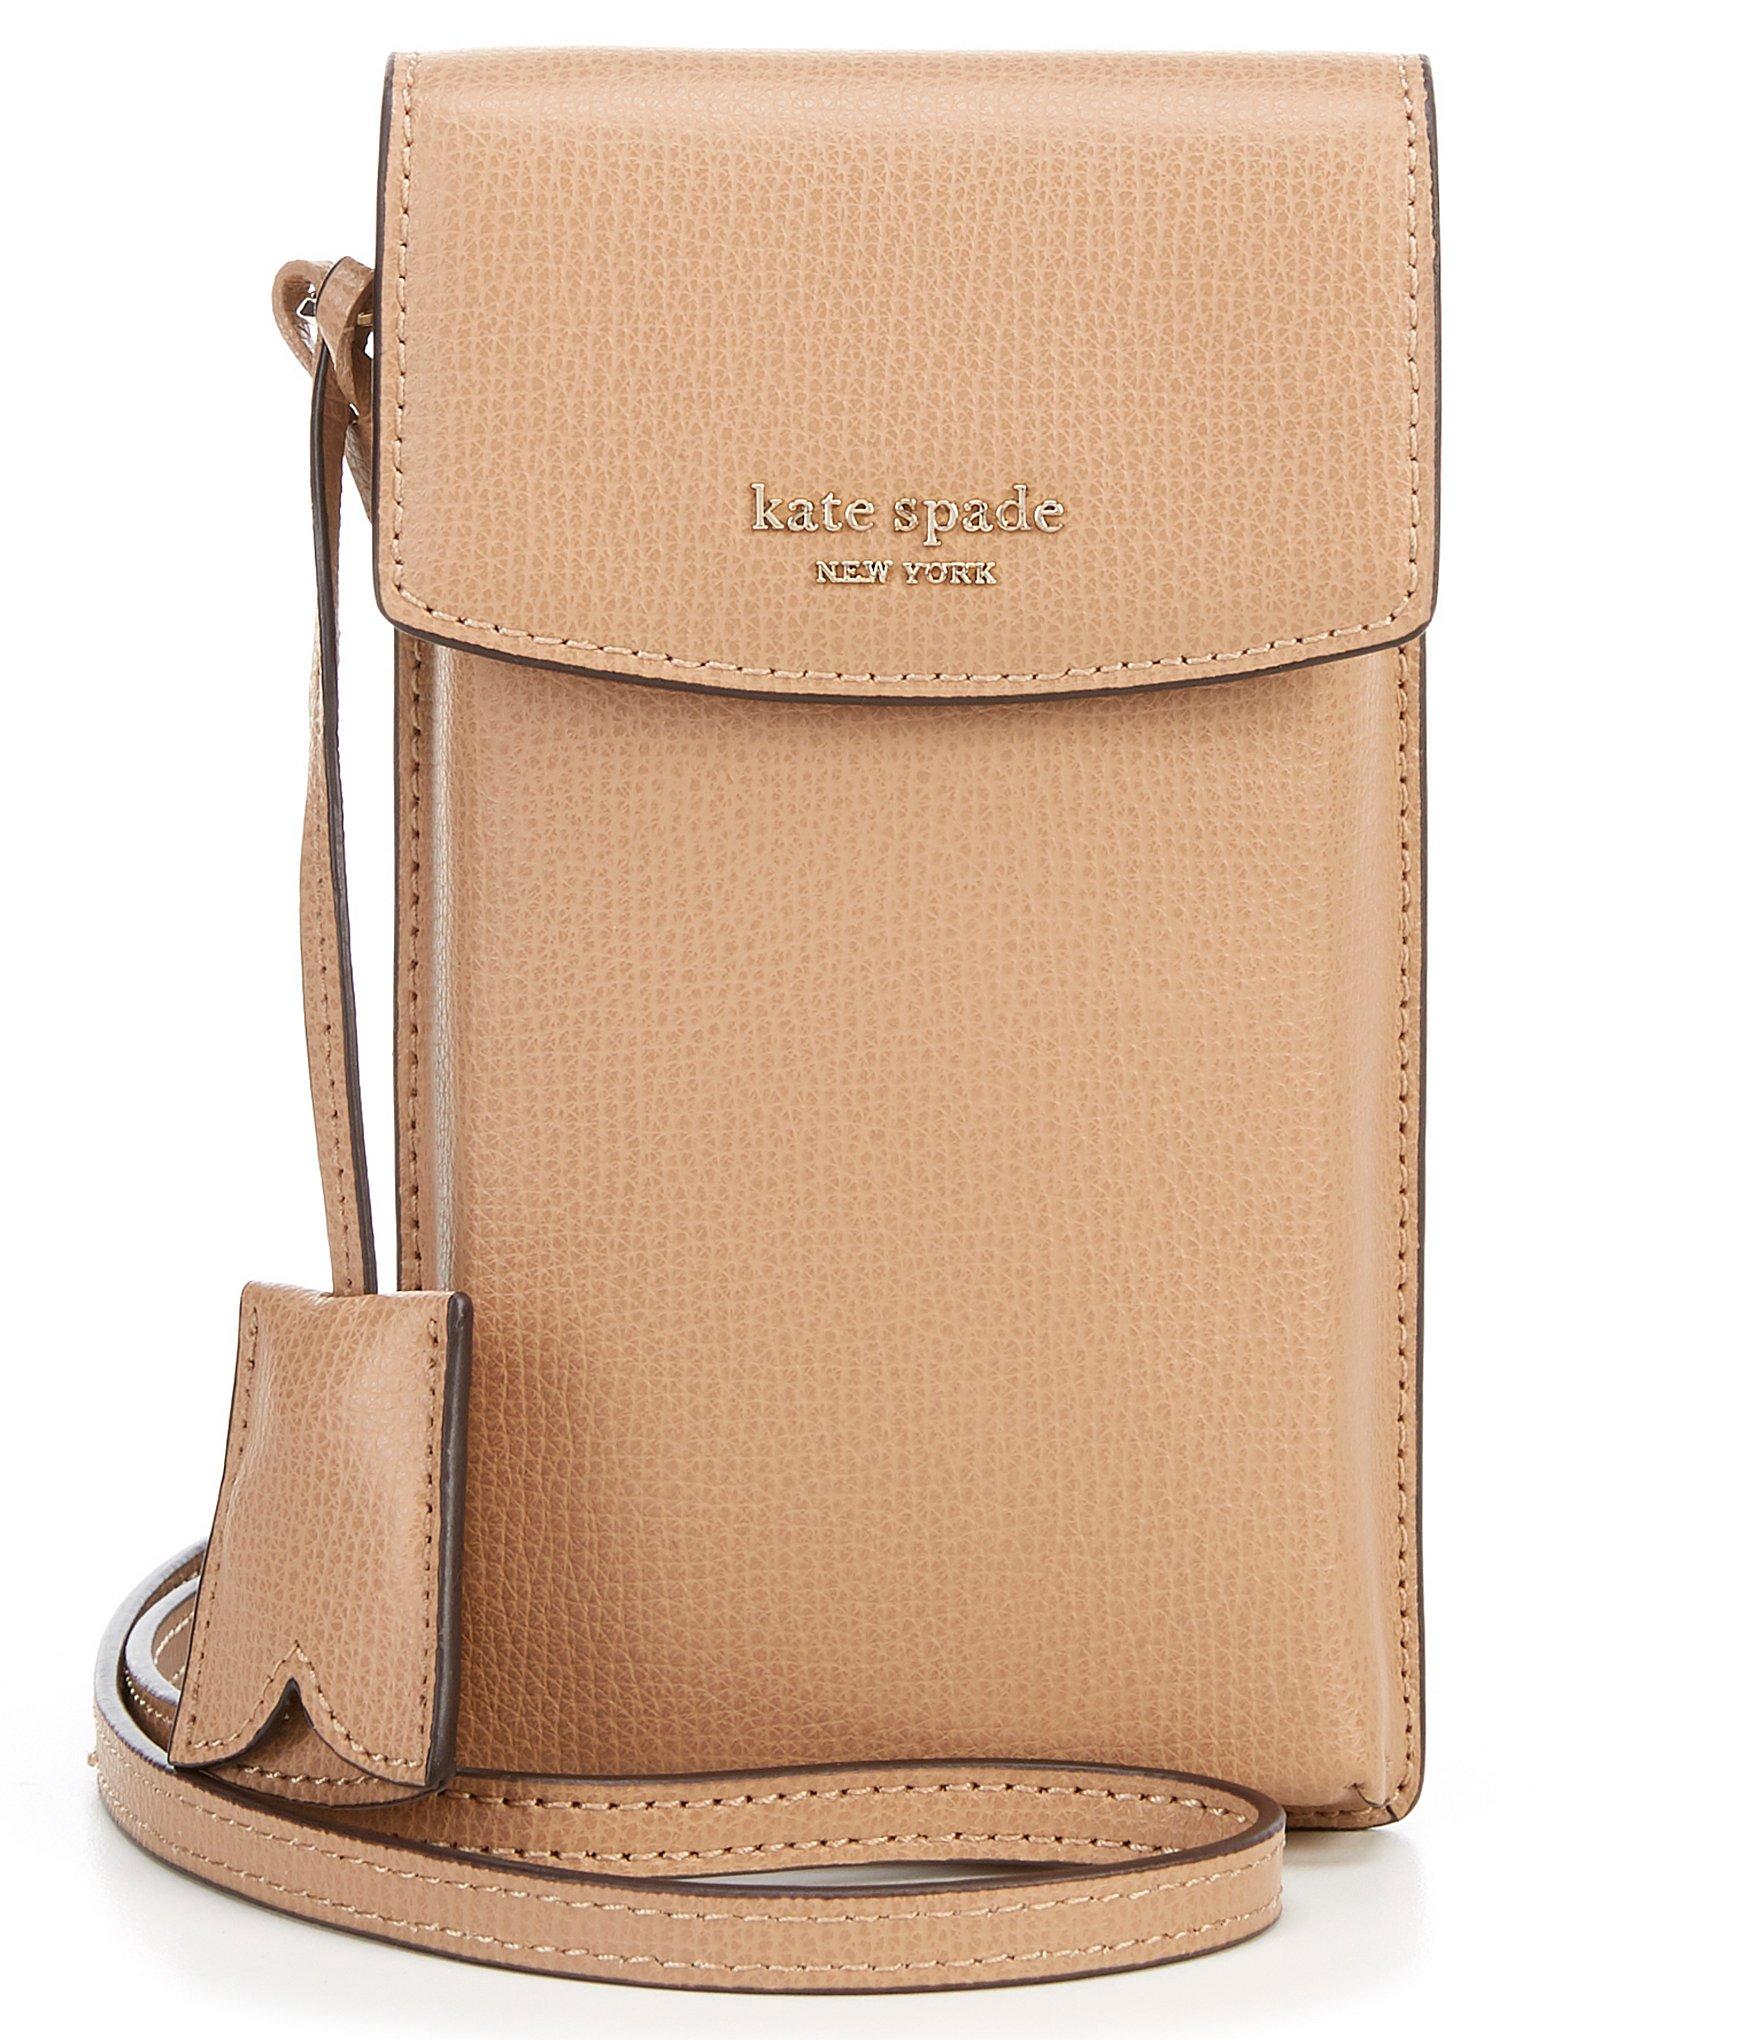 Kate Spade Sylvia North South Flap Iphone Case Crossbody Bag in Natural - Lyst